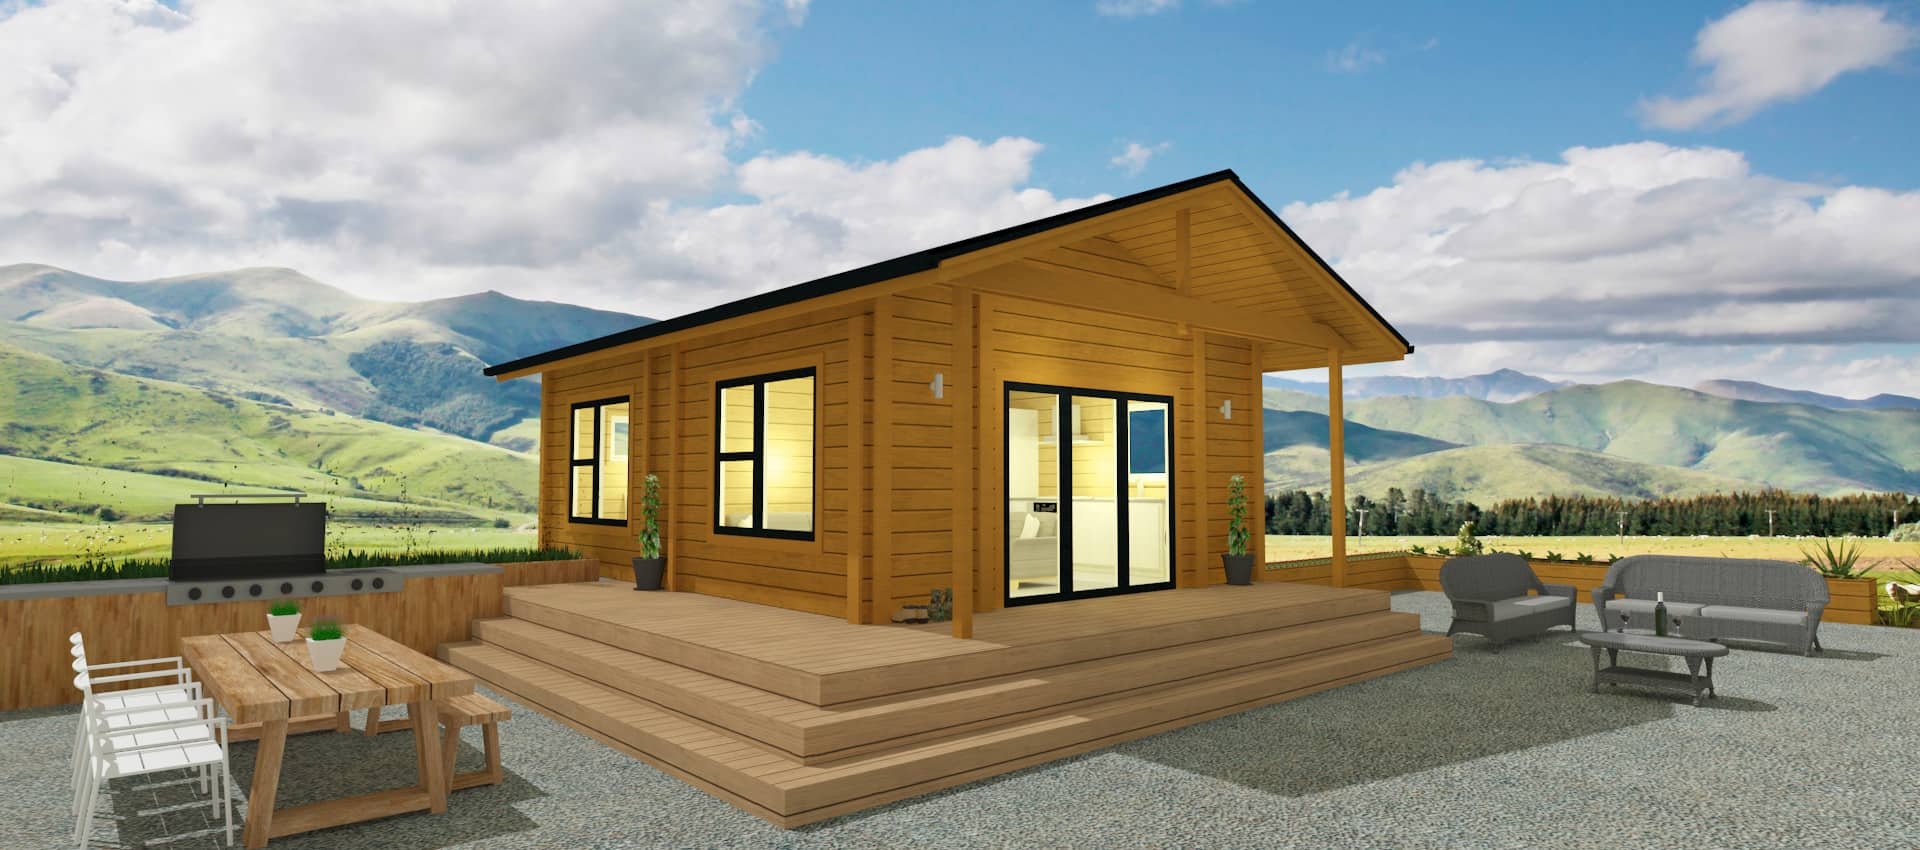 Eco Tiny Homes NZ Sustainable Building Little Owl